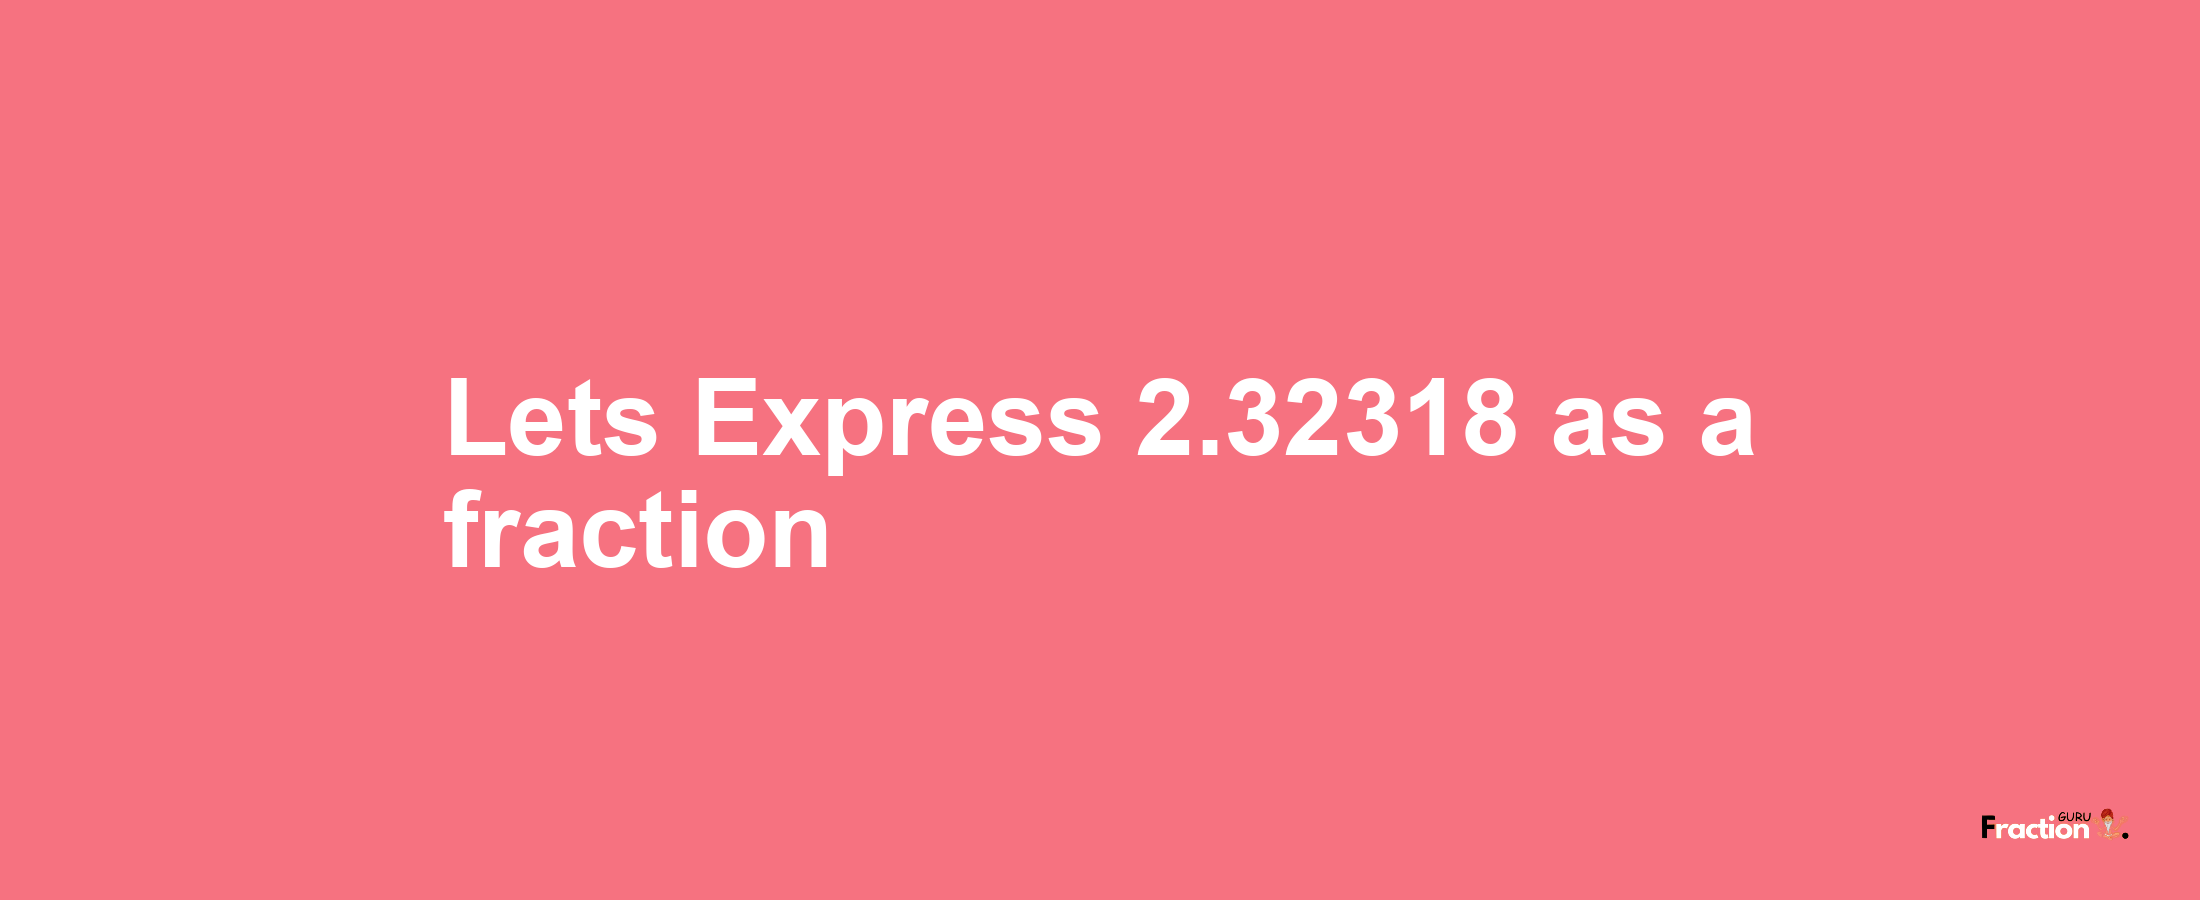 Lets Express 2.32318 as afraction